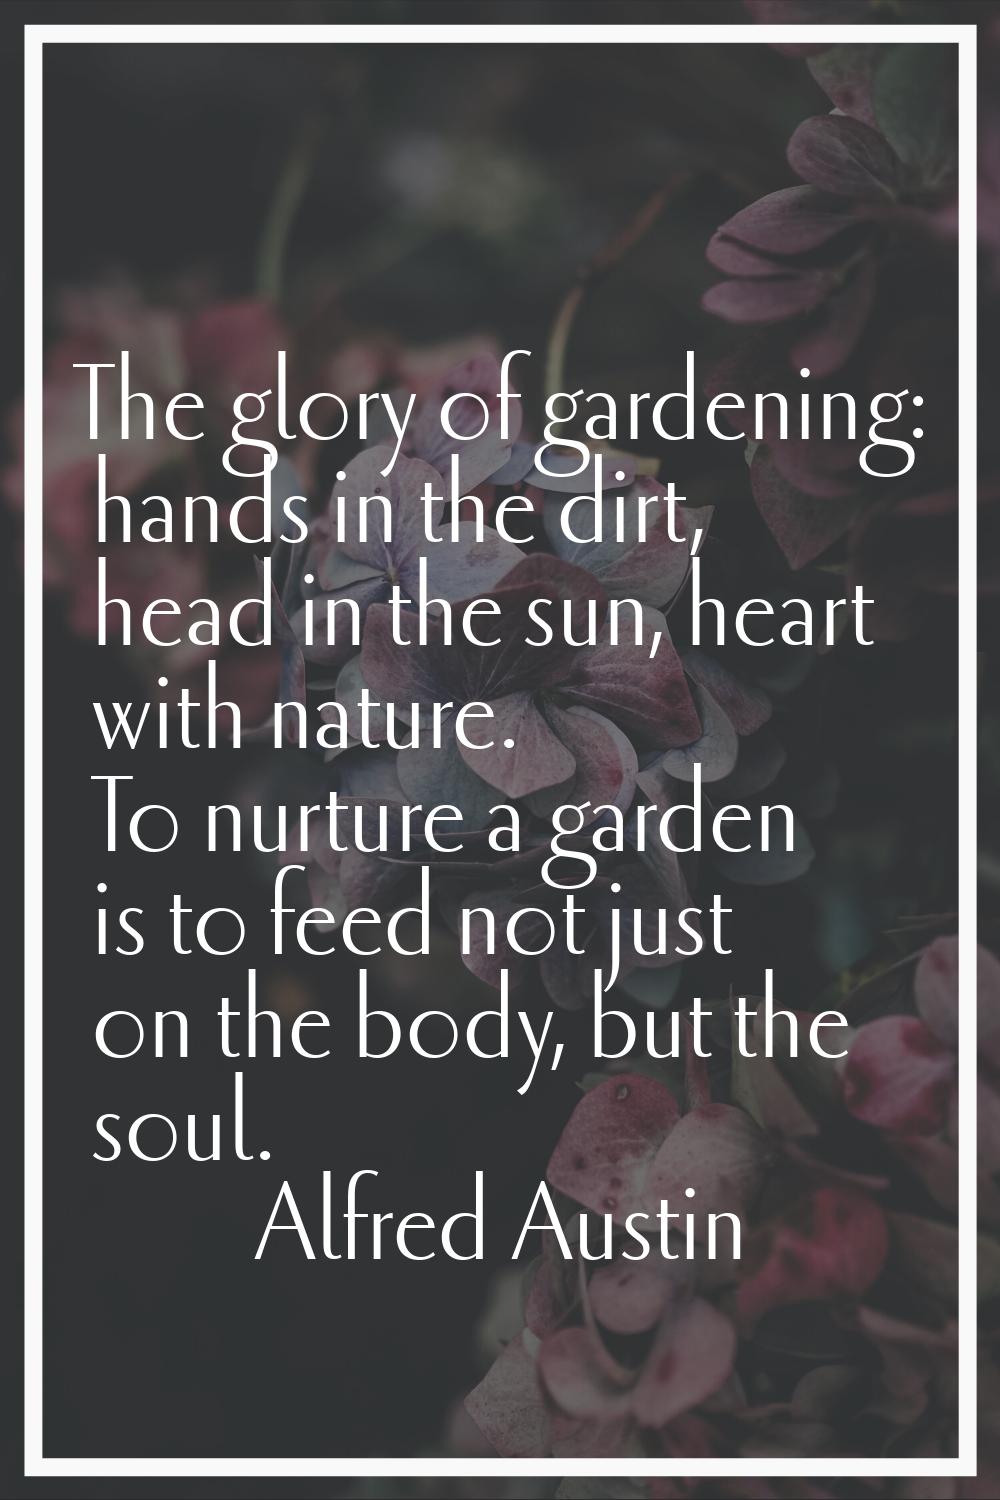 The glory of gardening: hands in the dirt, head in the sun, heart with nature. To nurture a garden 